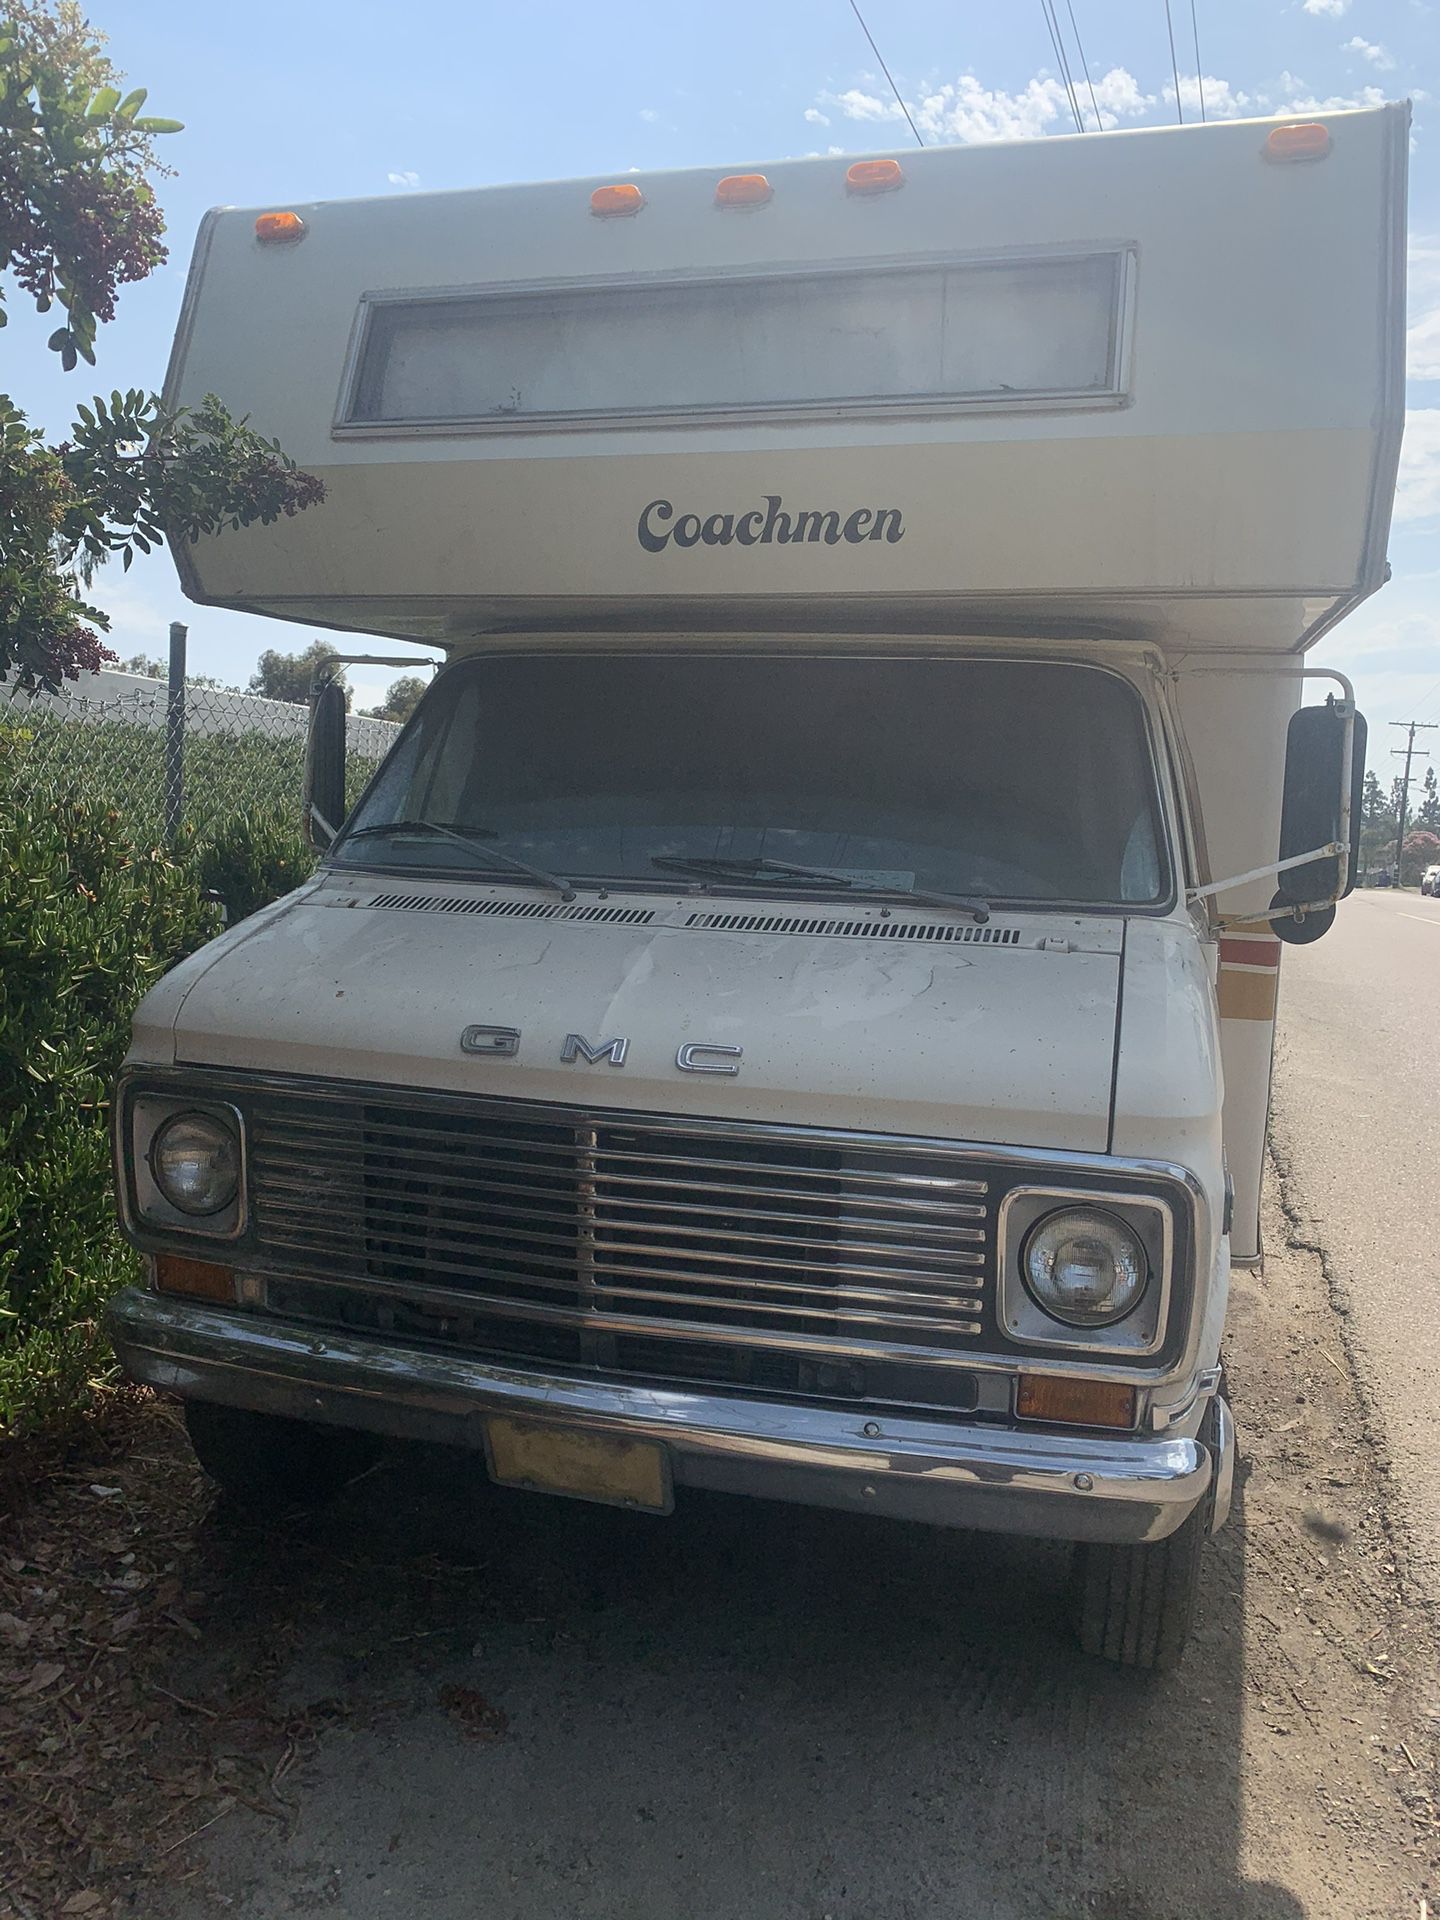 Coachman Motorhome 1976 - Equipped For Living On The Road 